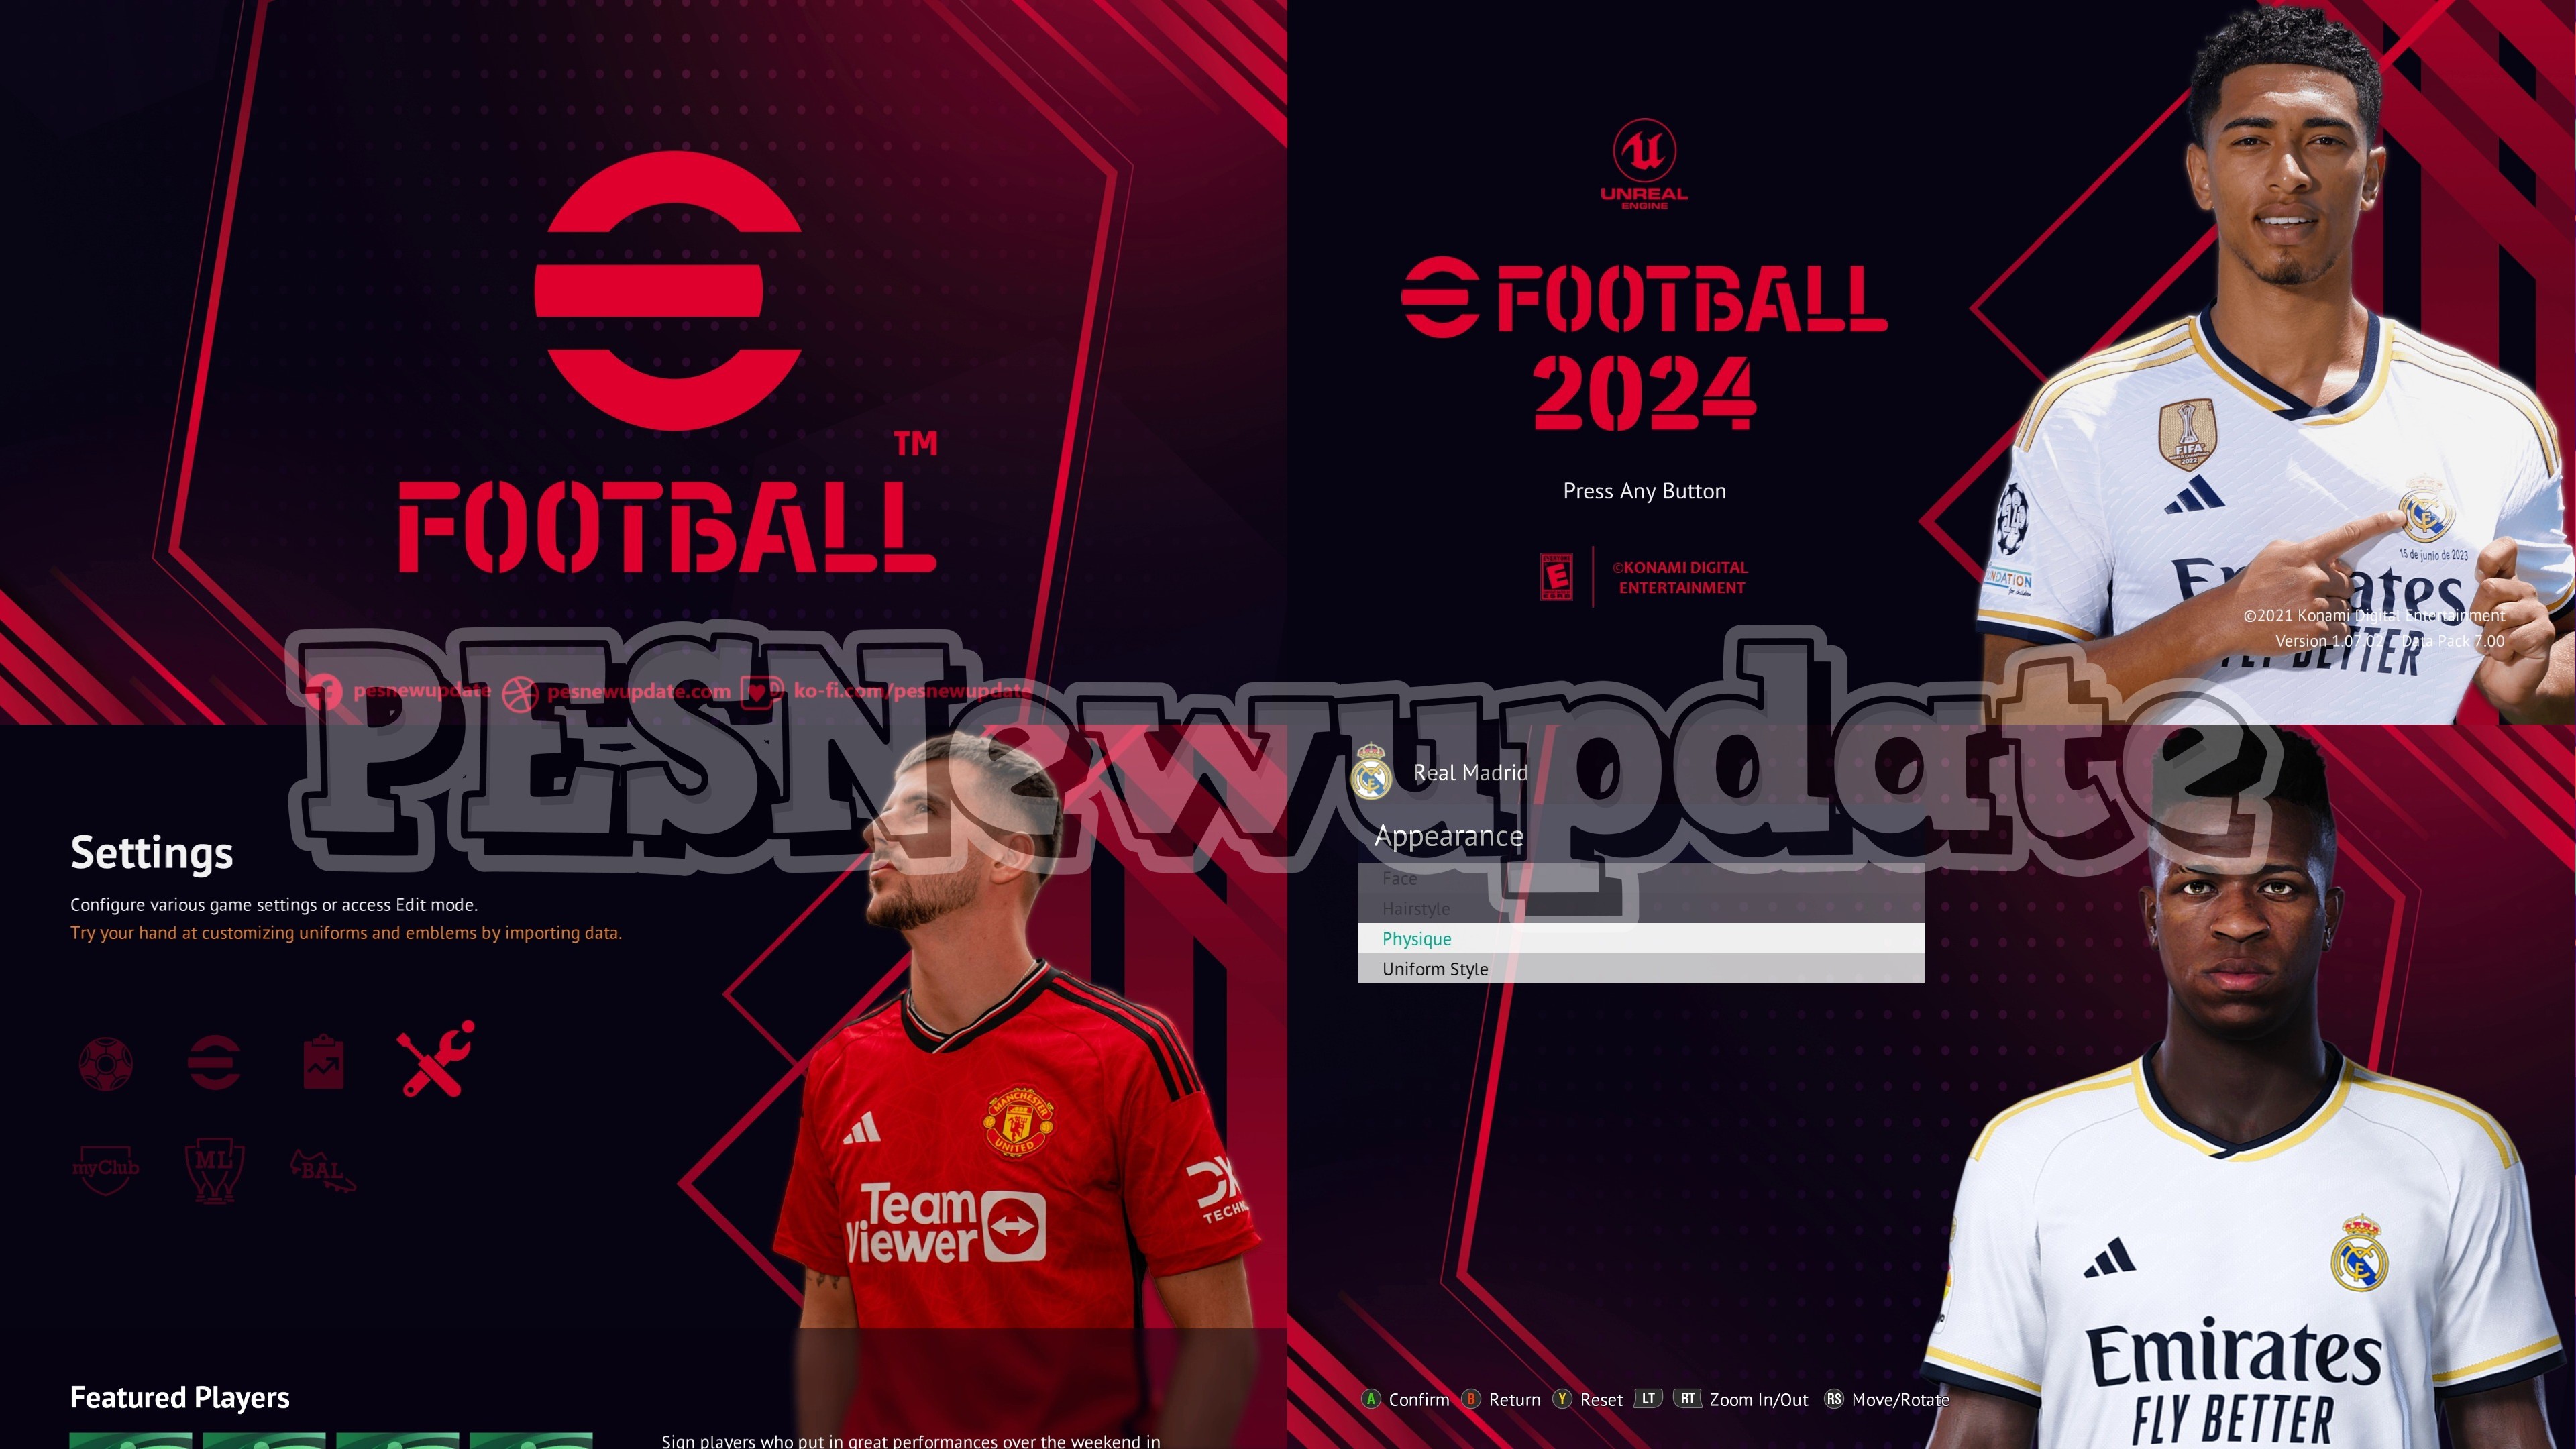 PES 2011 Additional Language Pack ( Commentary ) ~ PESNewupdate